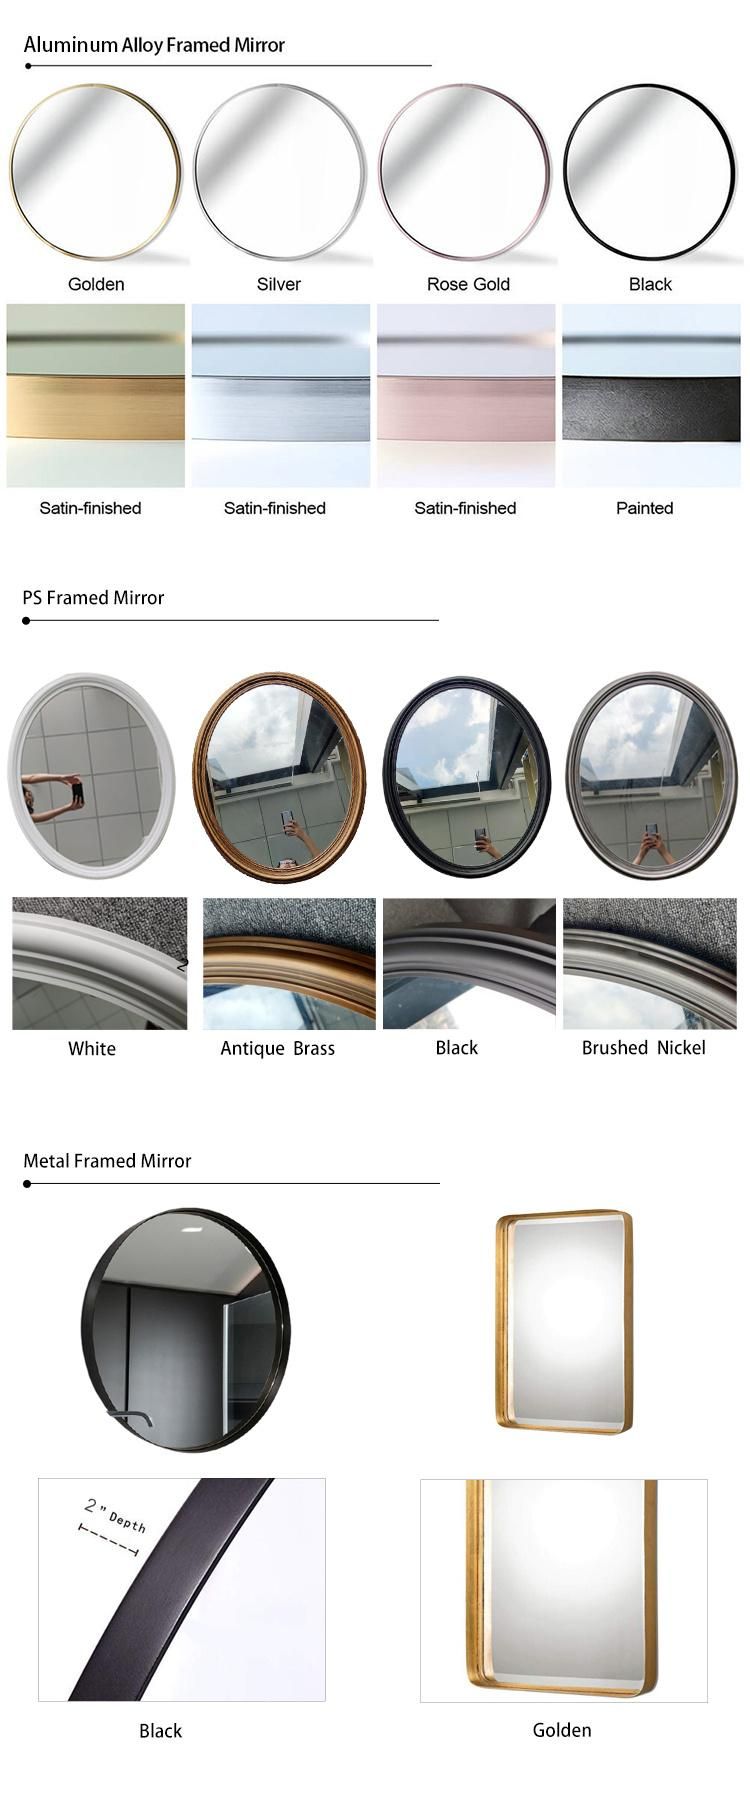 New Round Large Decorative Make-up Wall-Mounted Wall Mirror for Bedroom Bathroom Entryway